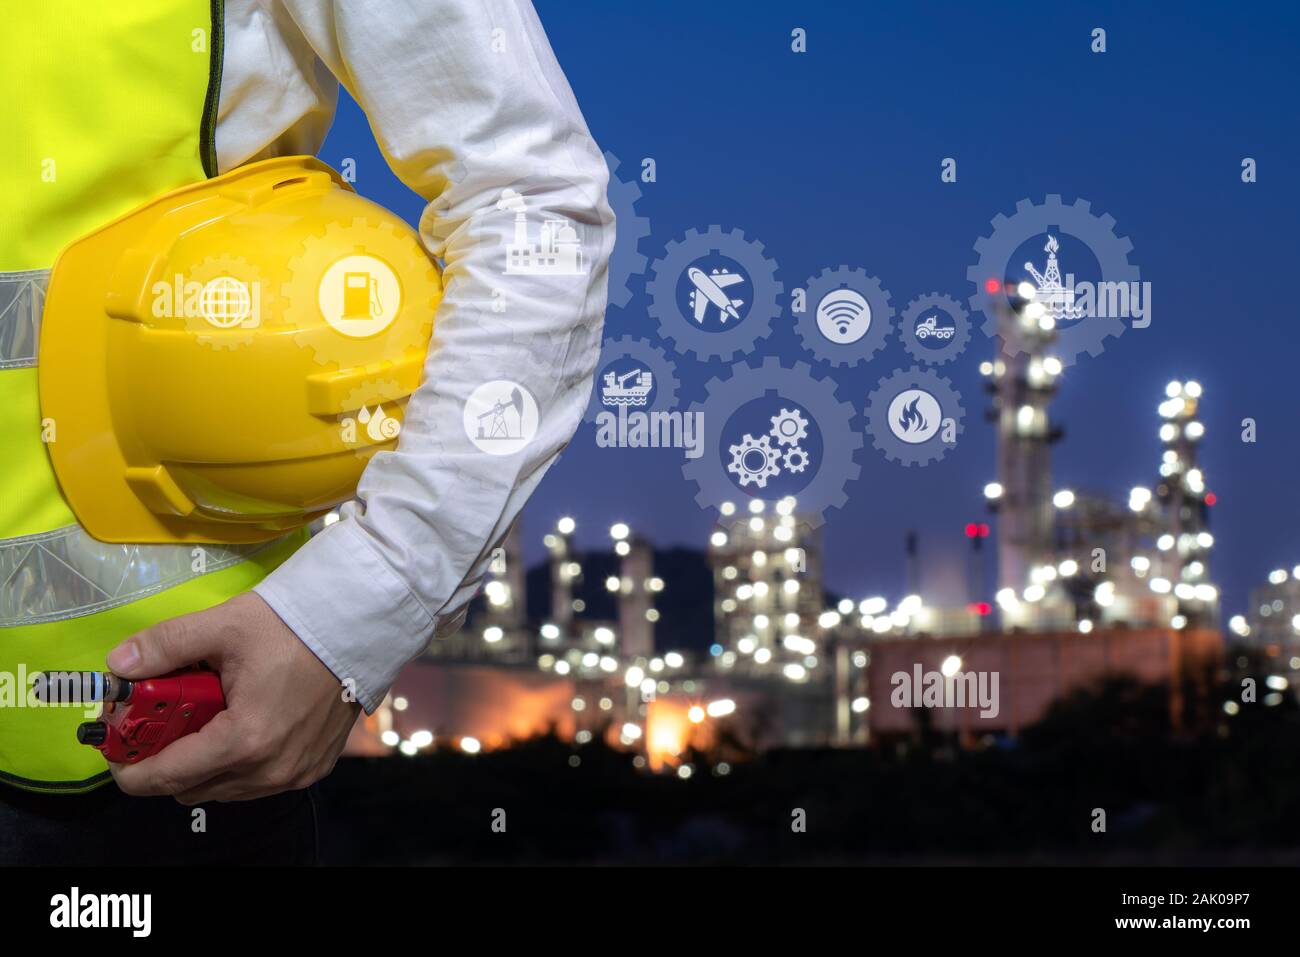 Engineer holding walkie talkie are working at refinery plant with icon connecting networking, Concept image Stock Photo